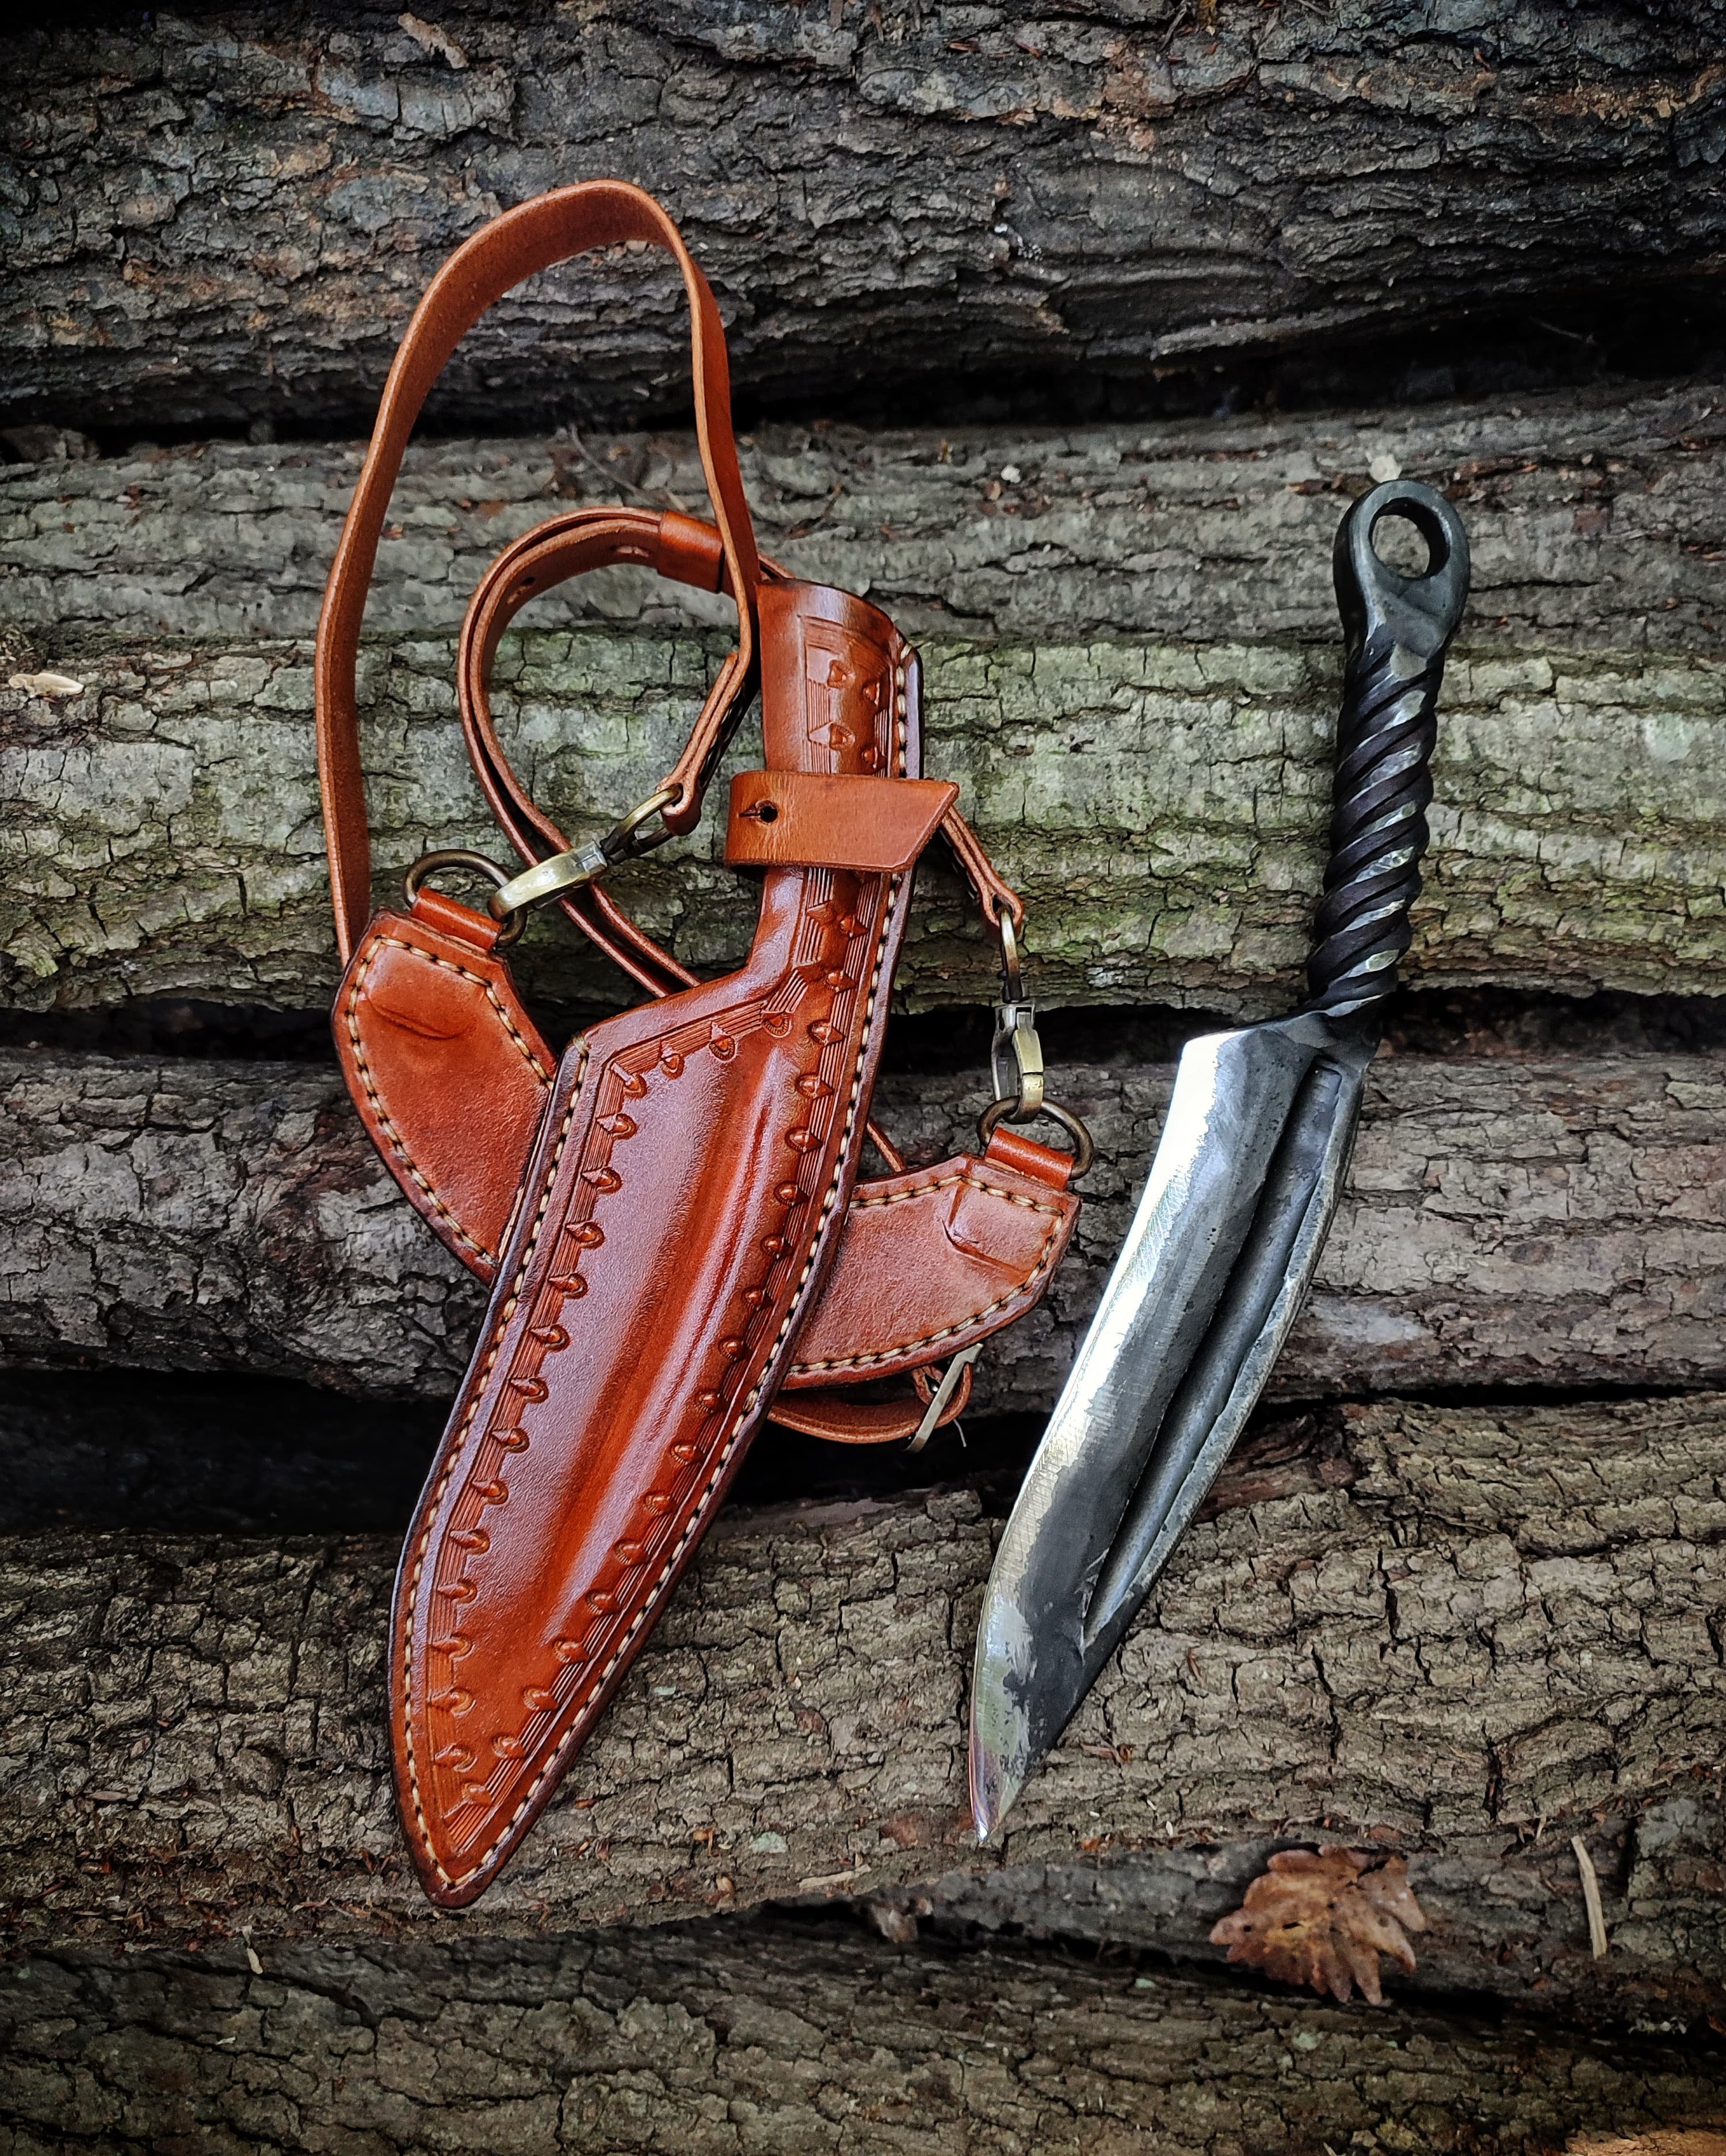  Beautiful Handmde Blacksmith Knives with Shoulder-Strap Suspension: The Fusion of Traditional Methods in Forging and Weaving